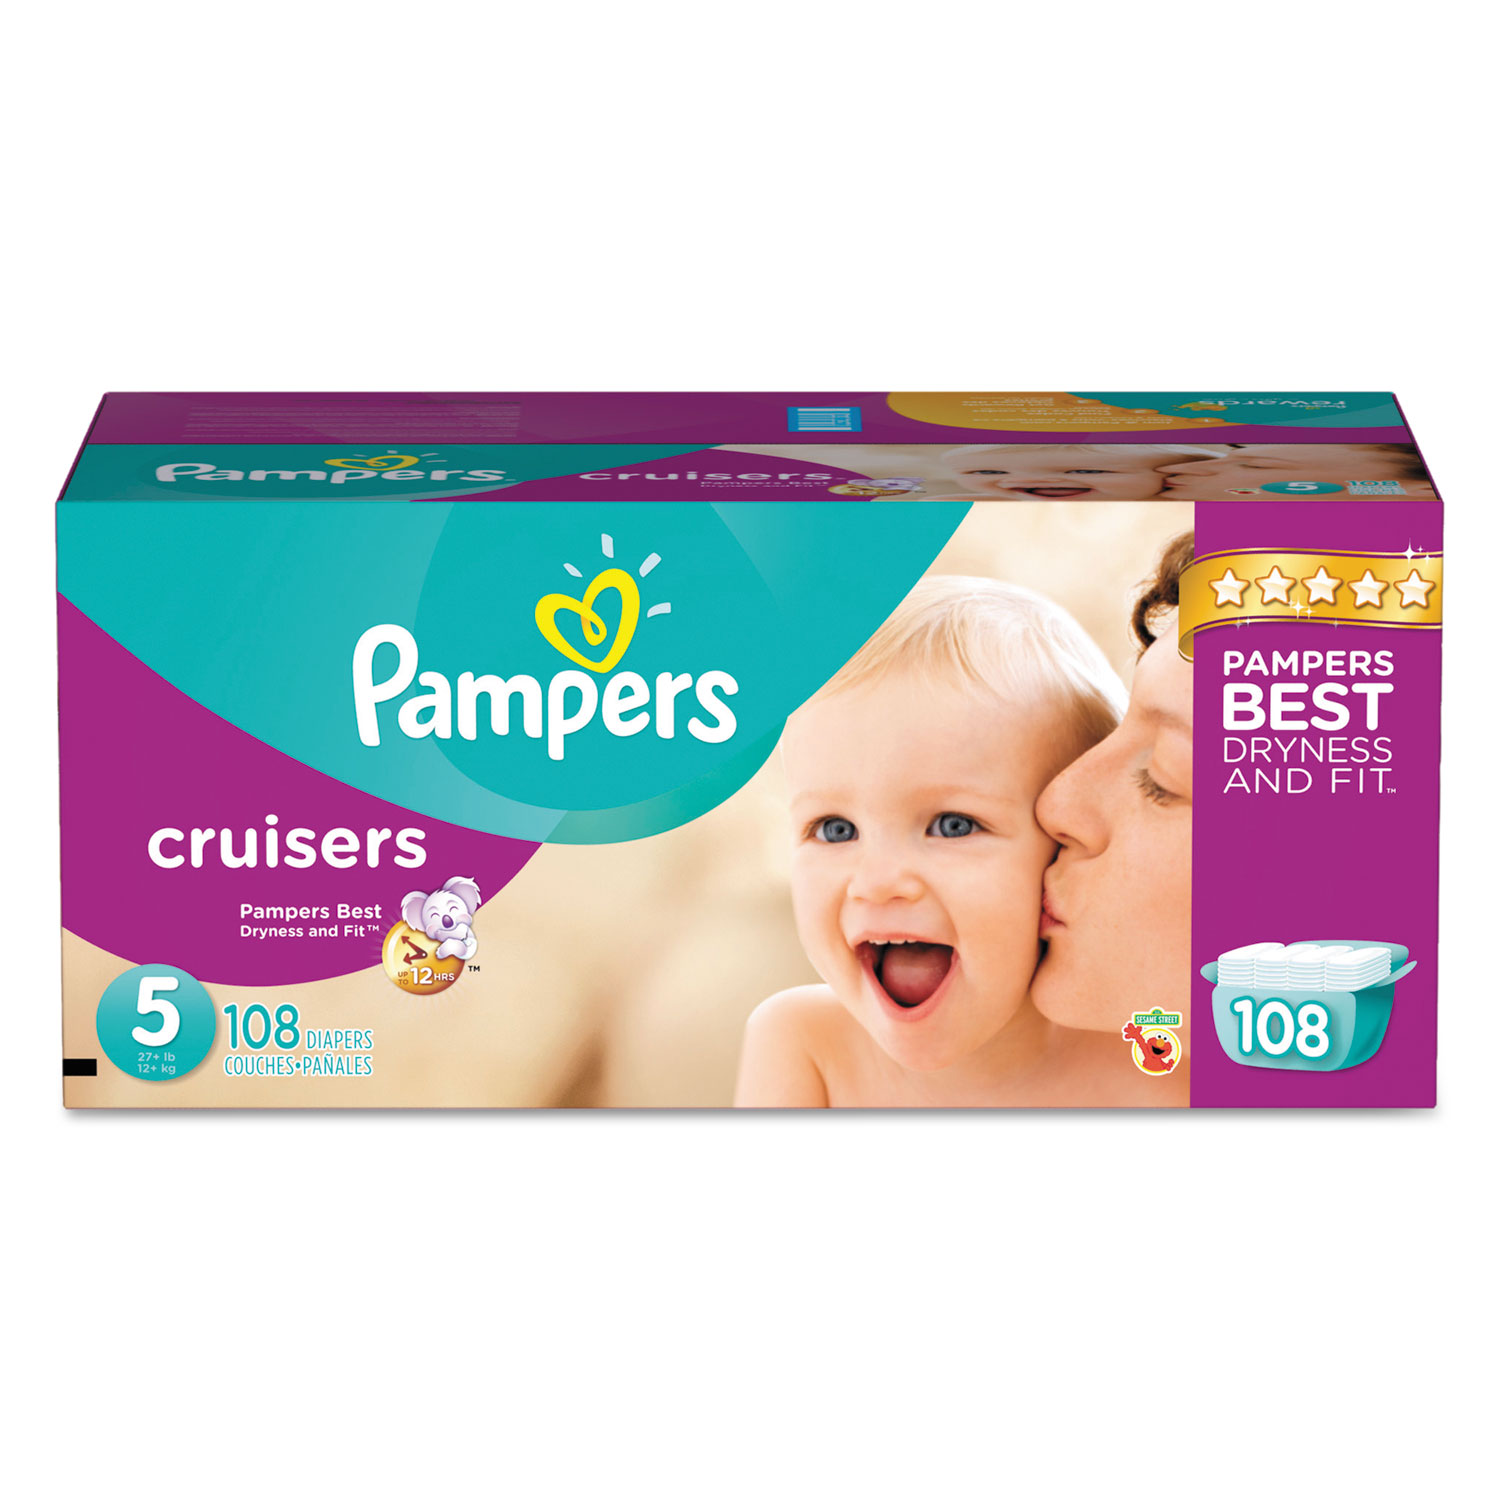 Cruisers Diapers, Size 5: 27 - 34 lbs, 108/Carton